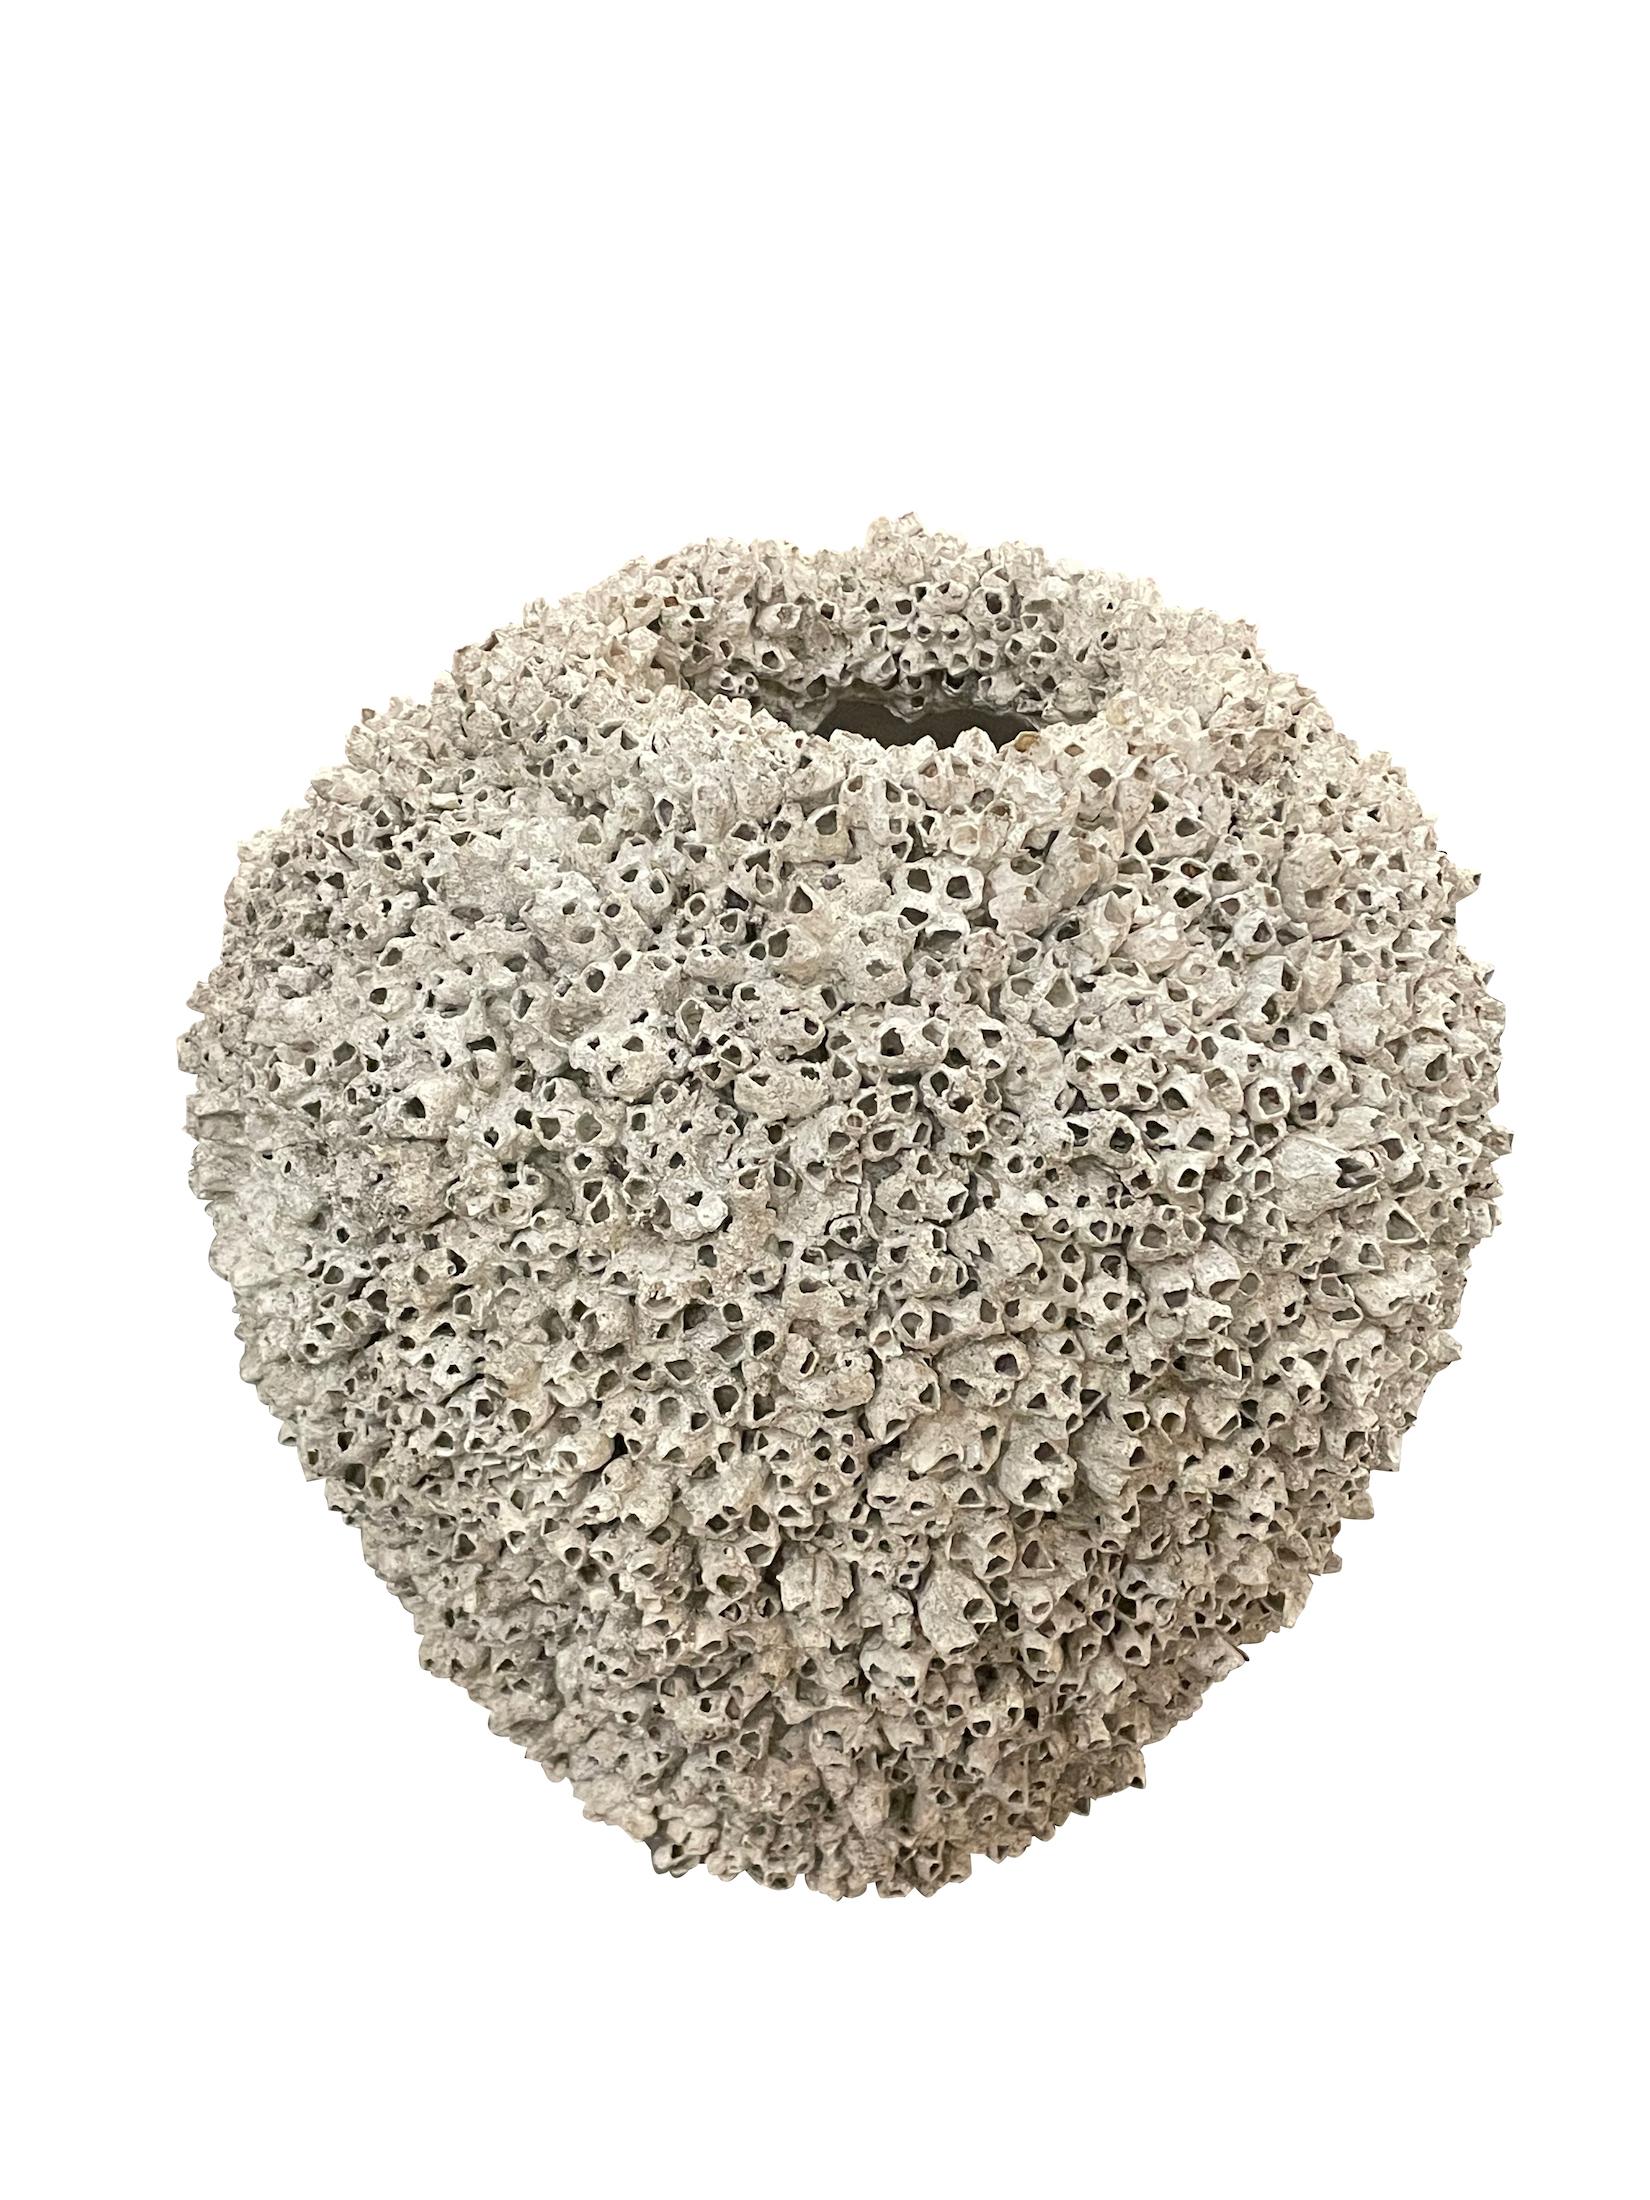 1950s Italian composition stone pot covered in snails.
Wide with narrow opening.
Can be used indoor or outdoors.
Part of a collection of other snail covered pots in different sizes and shapes.
ARRIVING APRIL.